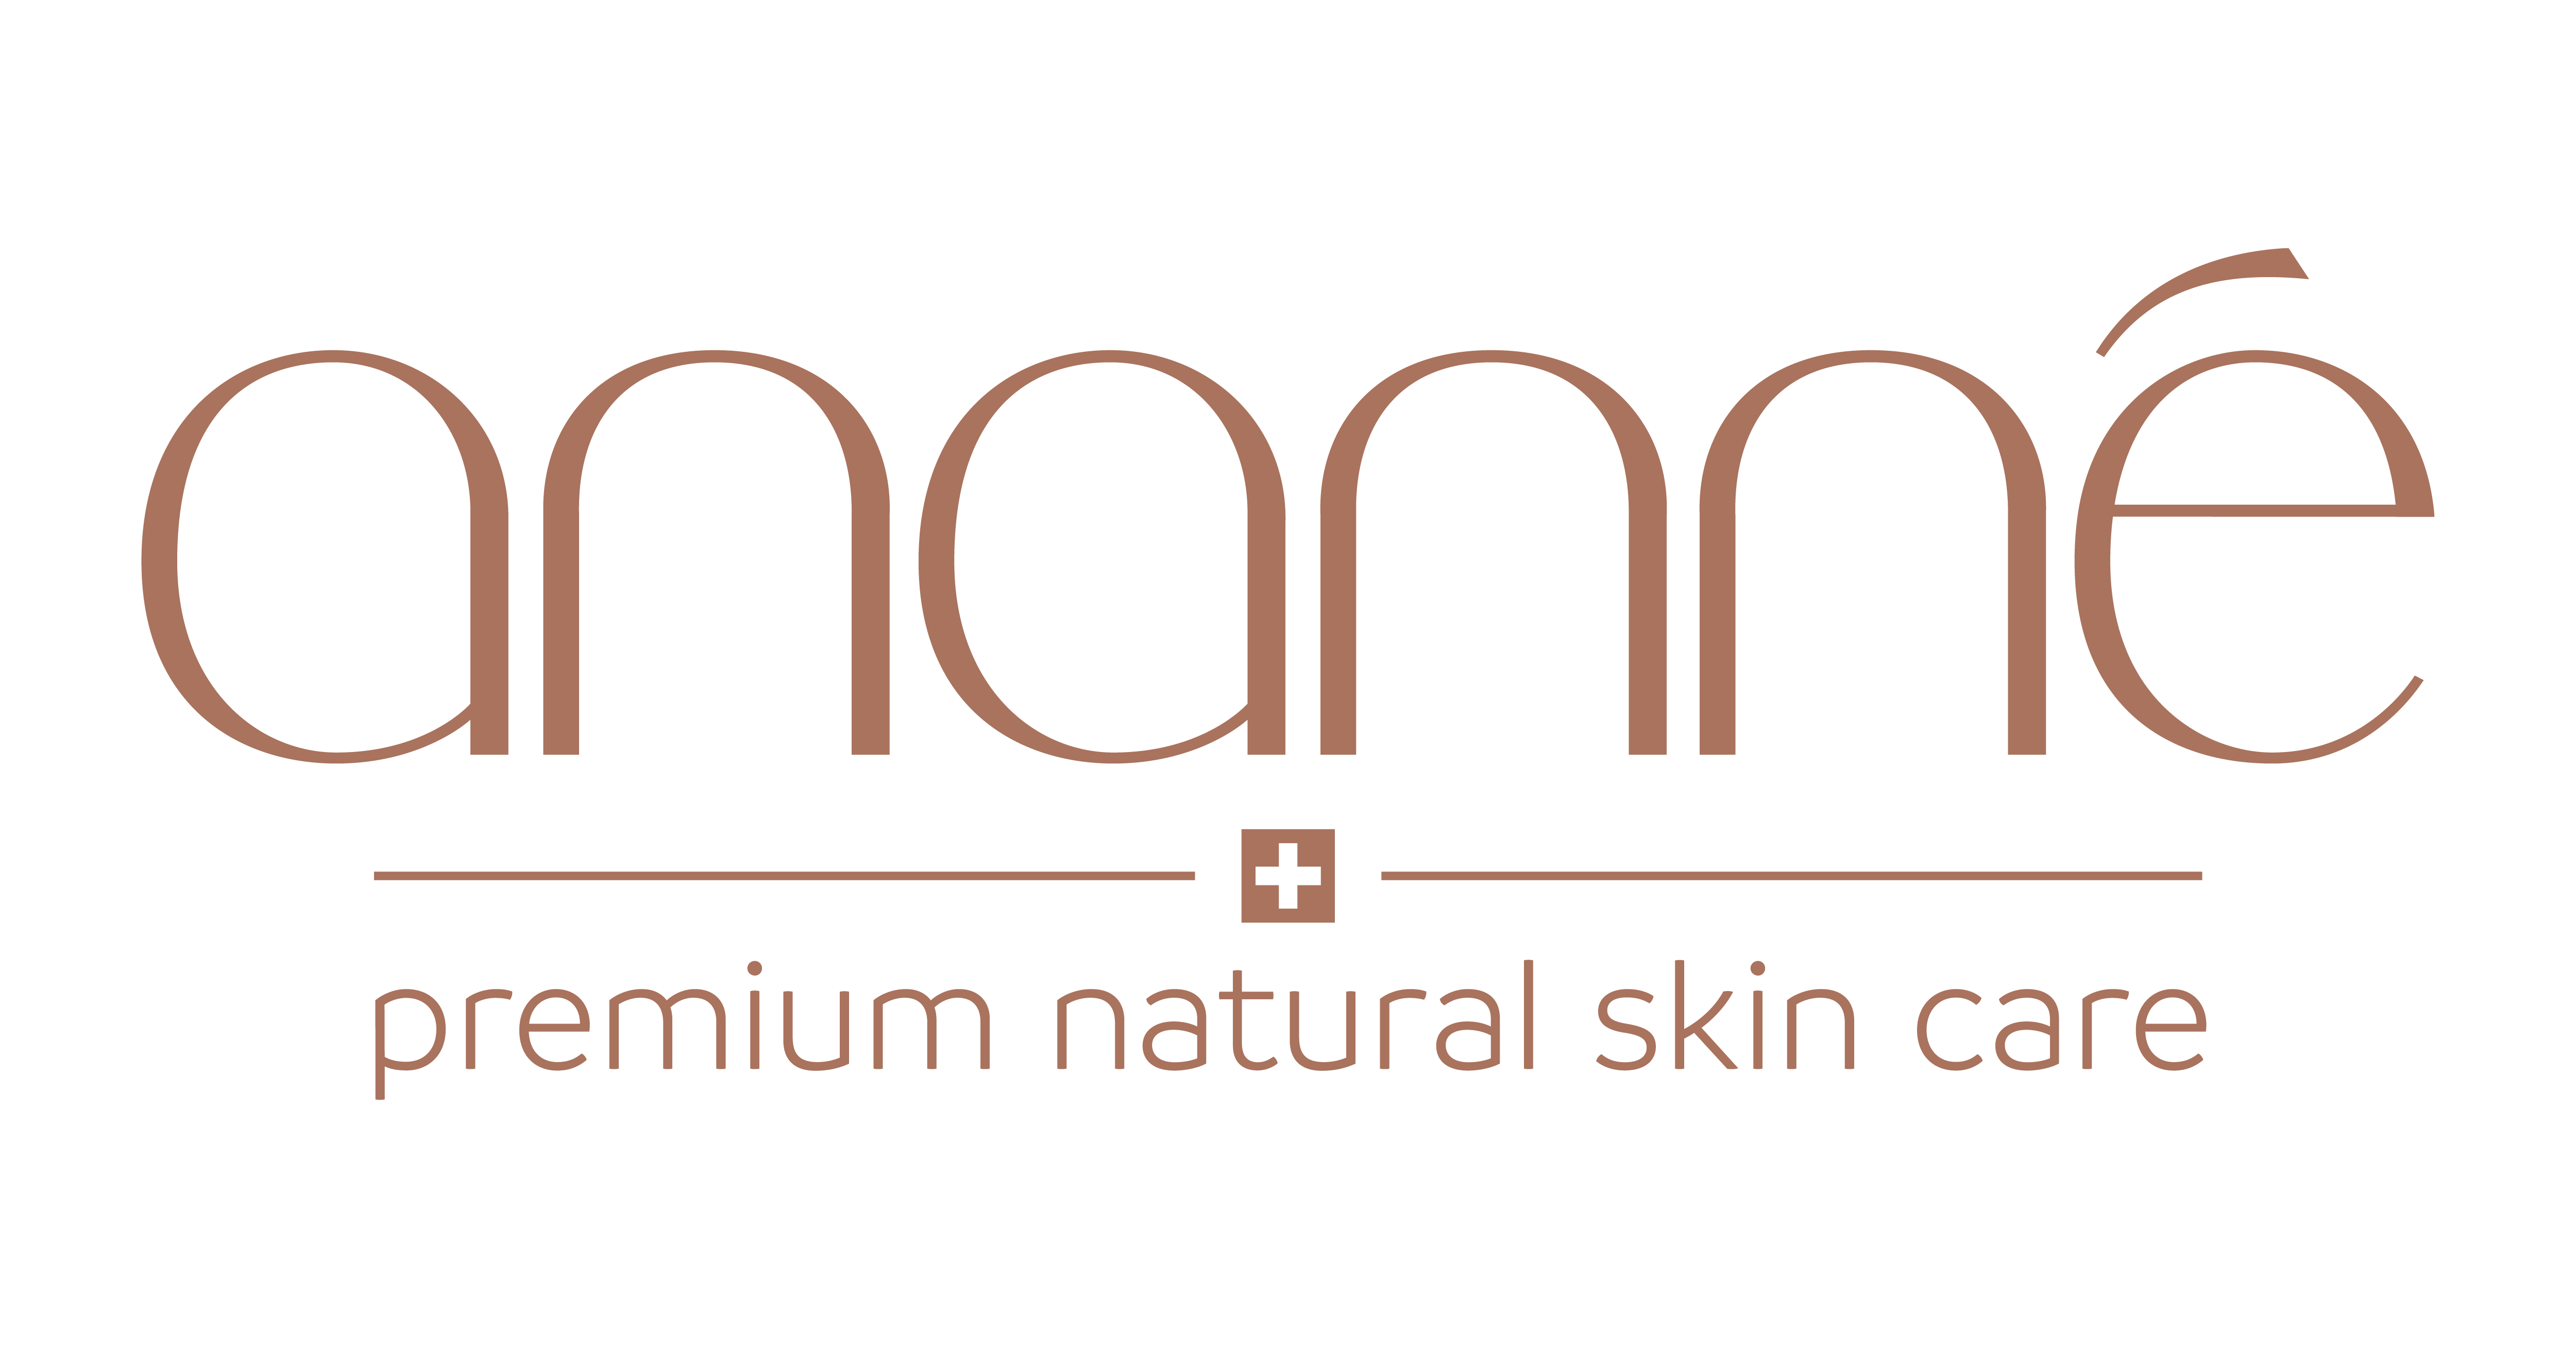 ananné is high-quality Swiss natural cosmetics